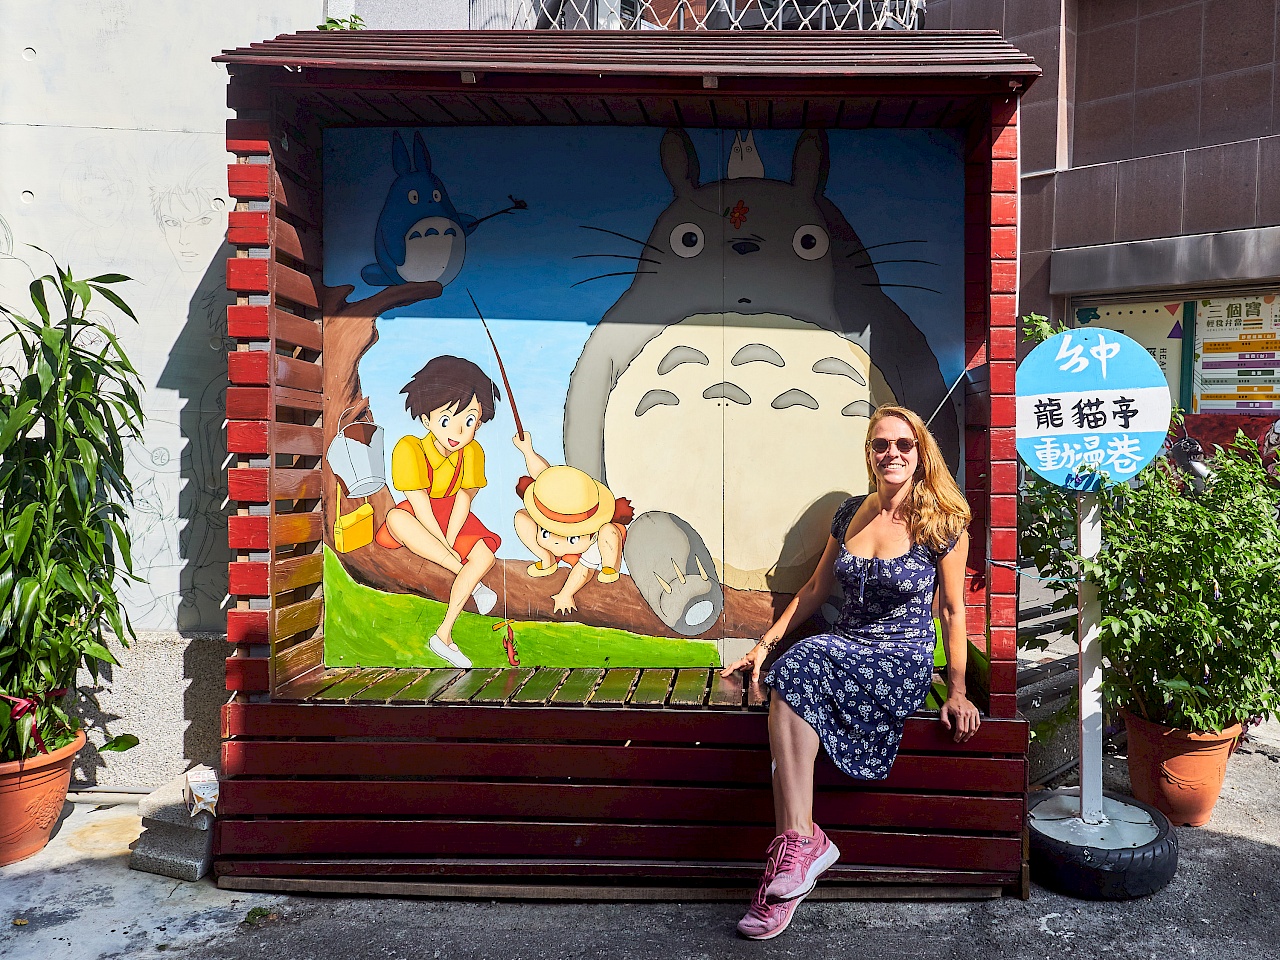 Totoro Bushaltestelle in der Painted Animation Lane in Taichung (Taiwan)